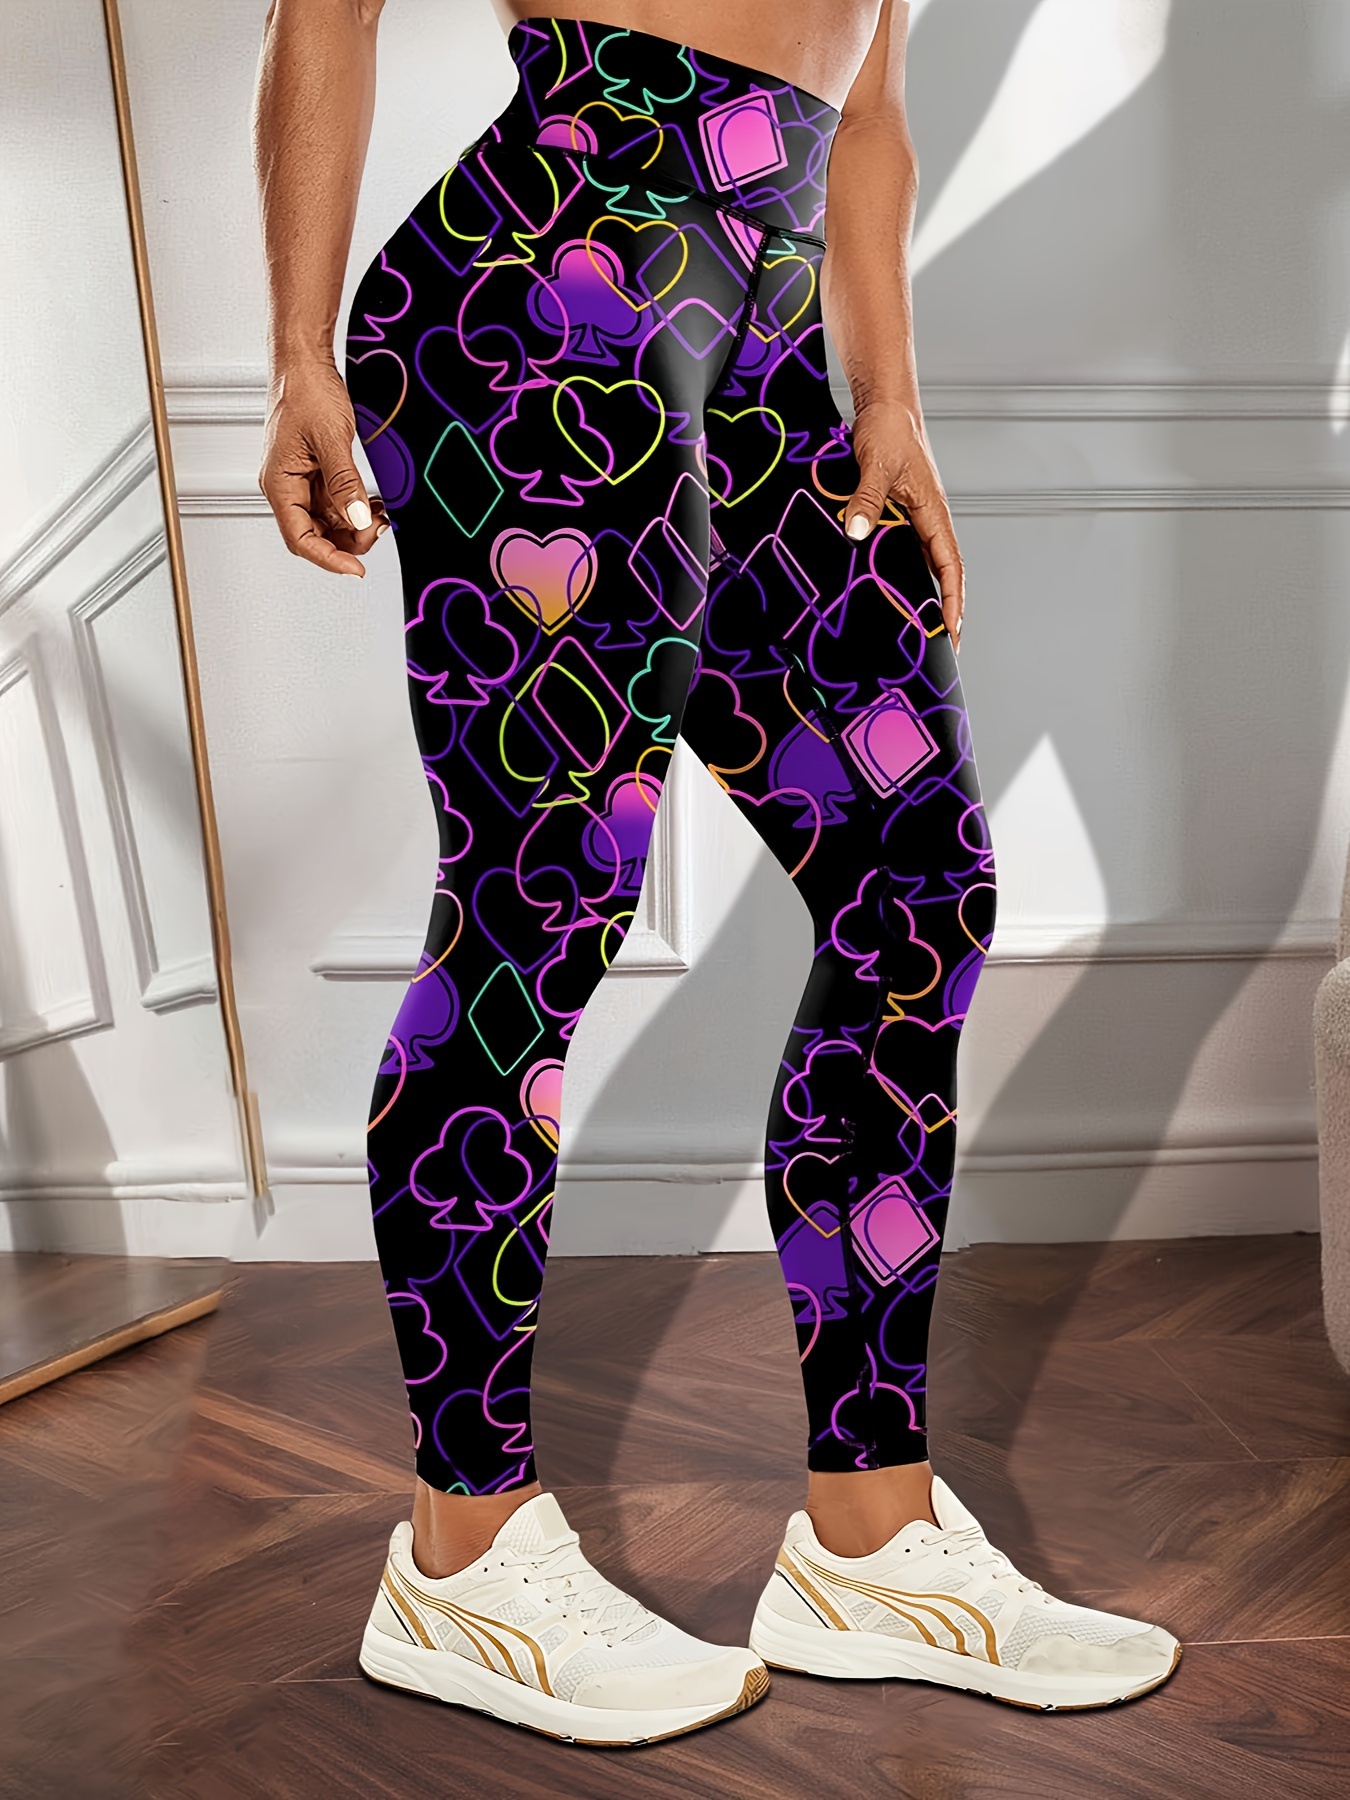 TWIFER Valentines Day Gift Sets Women's Legging Womens Leggings Valentine  Day Cute Print Casual Comfortable Home Leggings Boot Pants 